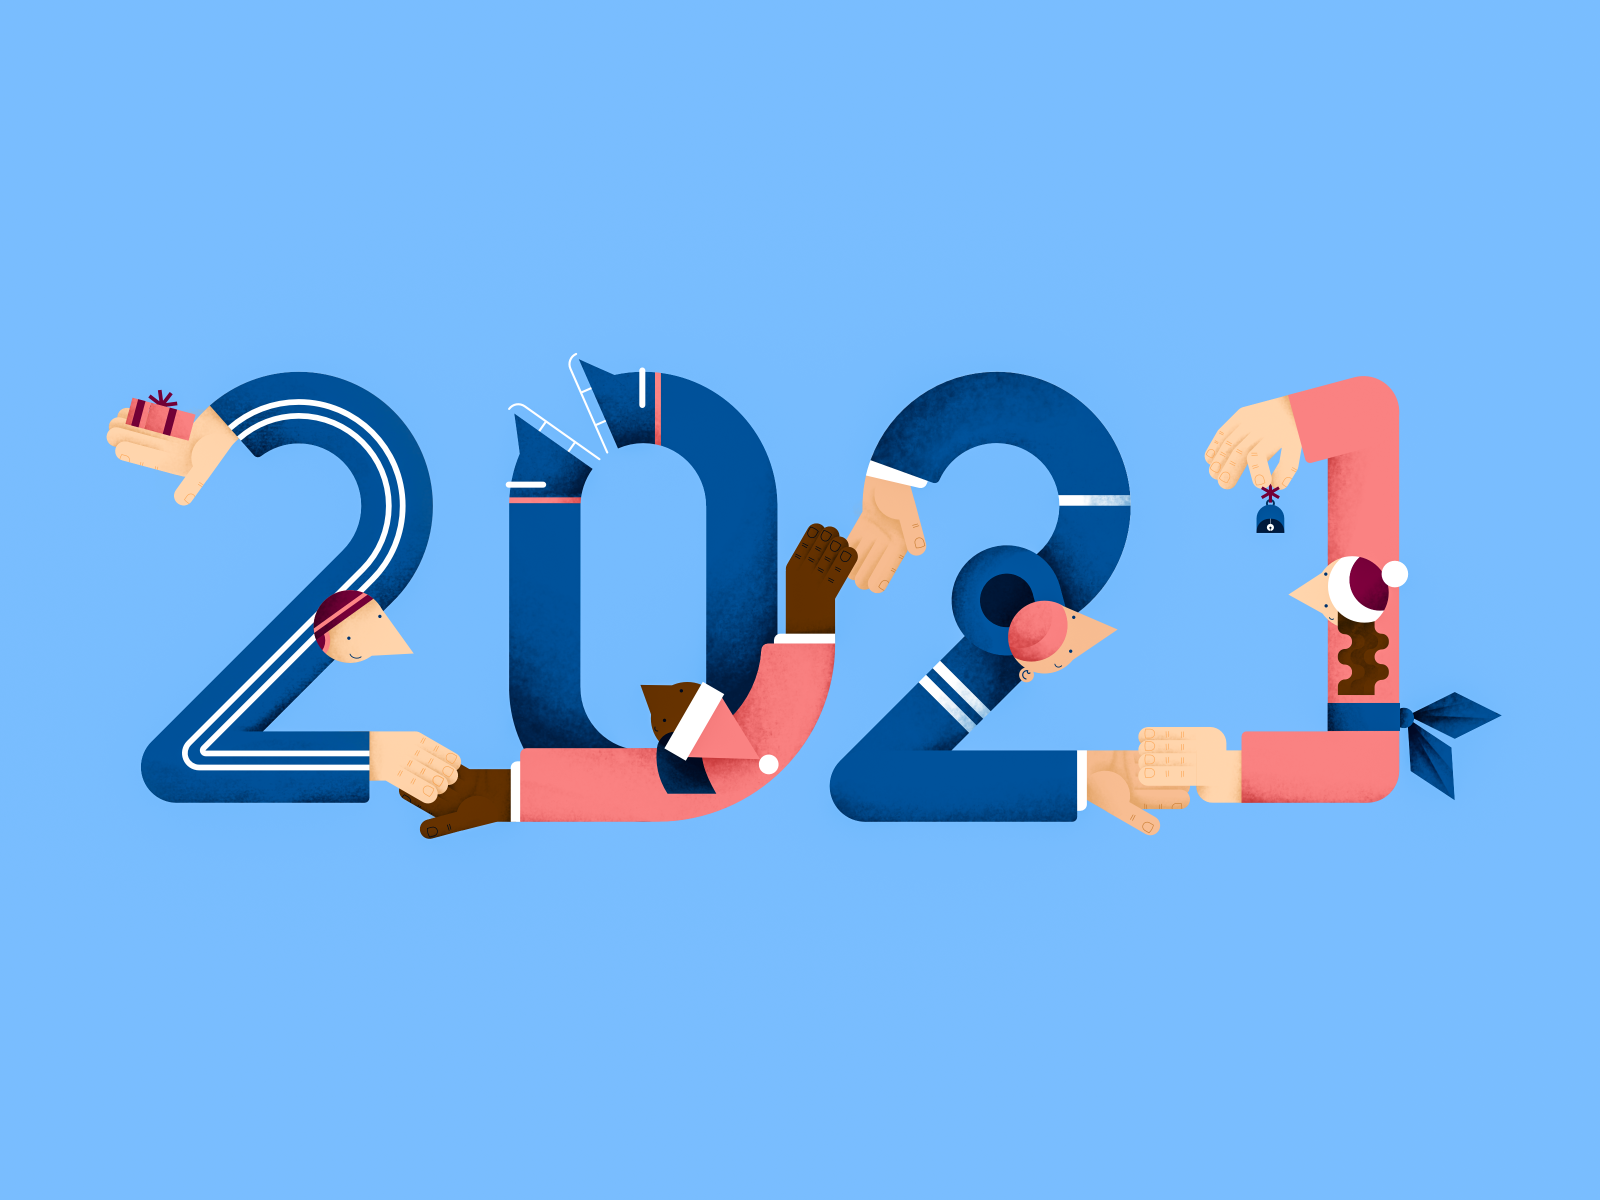 2021 gift 2021 characterdesign color design digital flat hands illustration number new year people textures vector together winter year